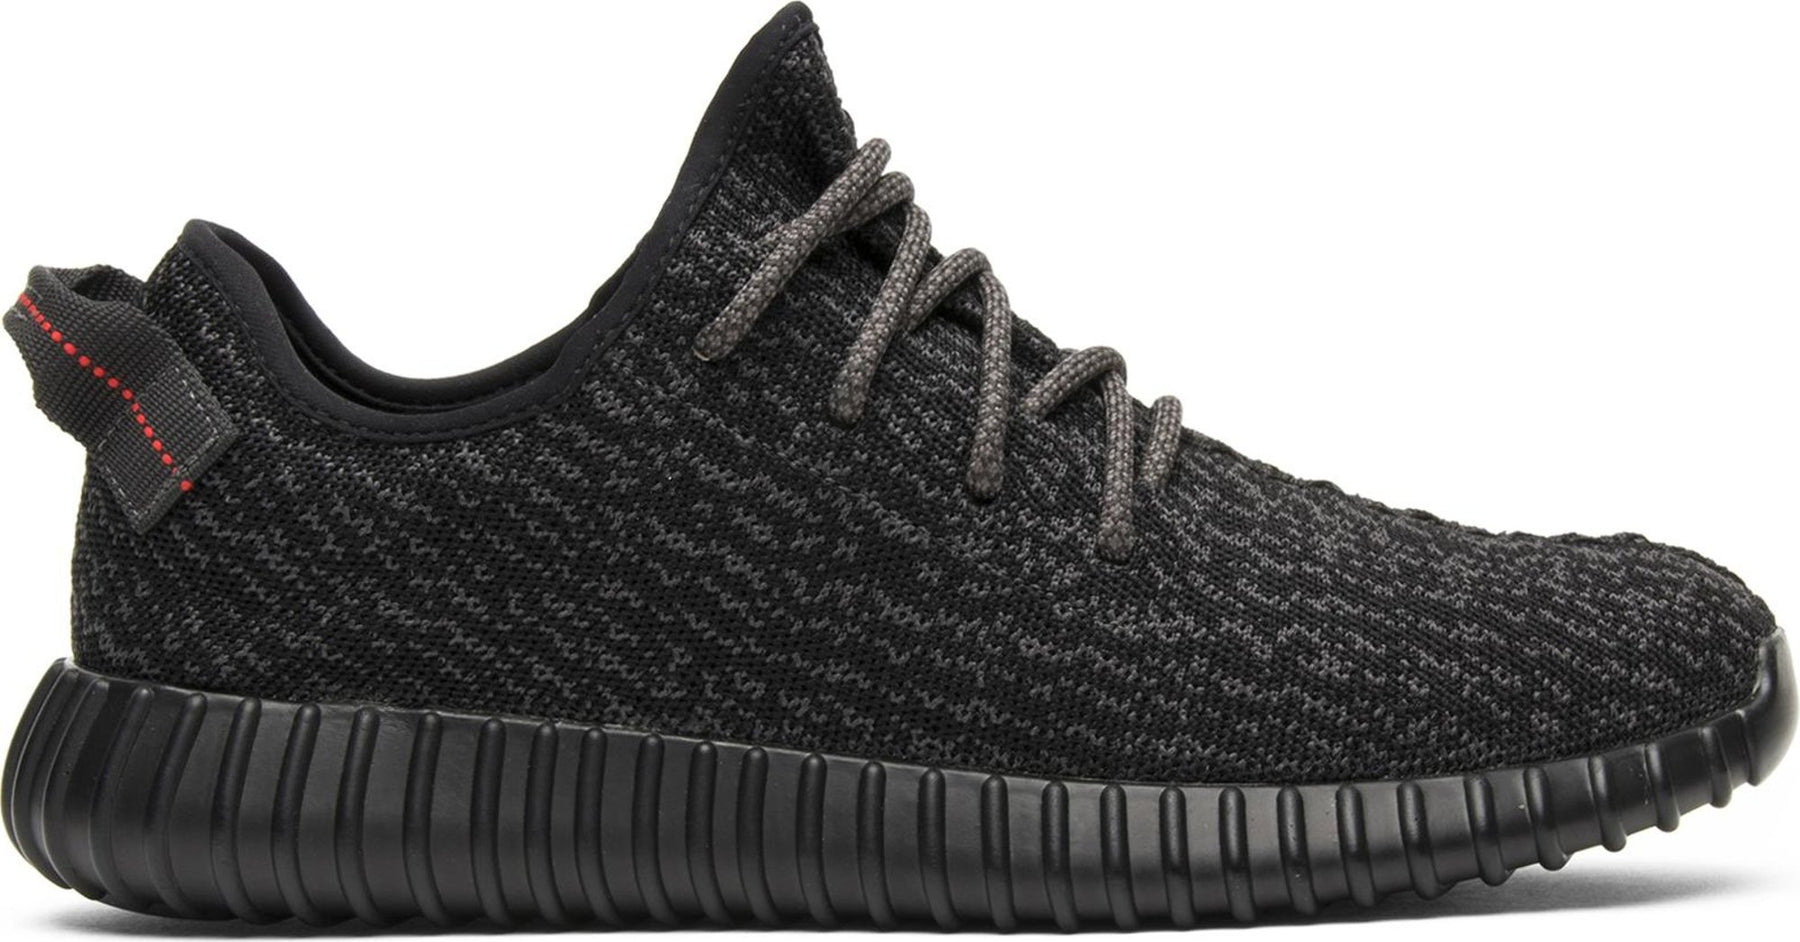 Adidas Yeezy Boost 350 Pirate Black (2016) (PreOwned)